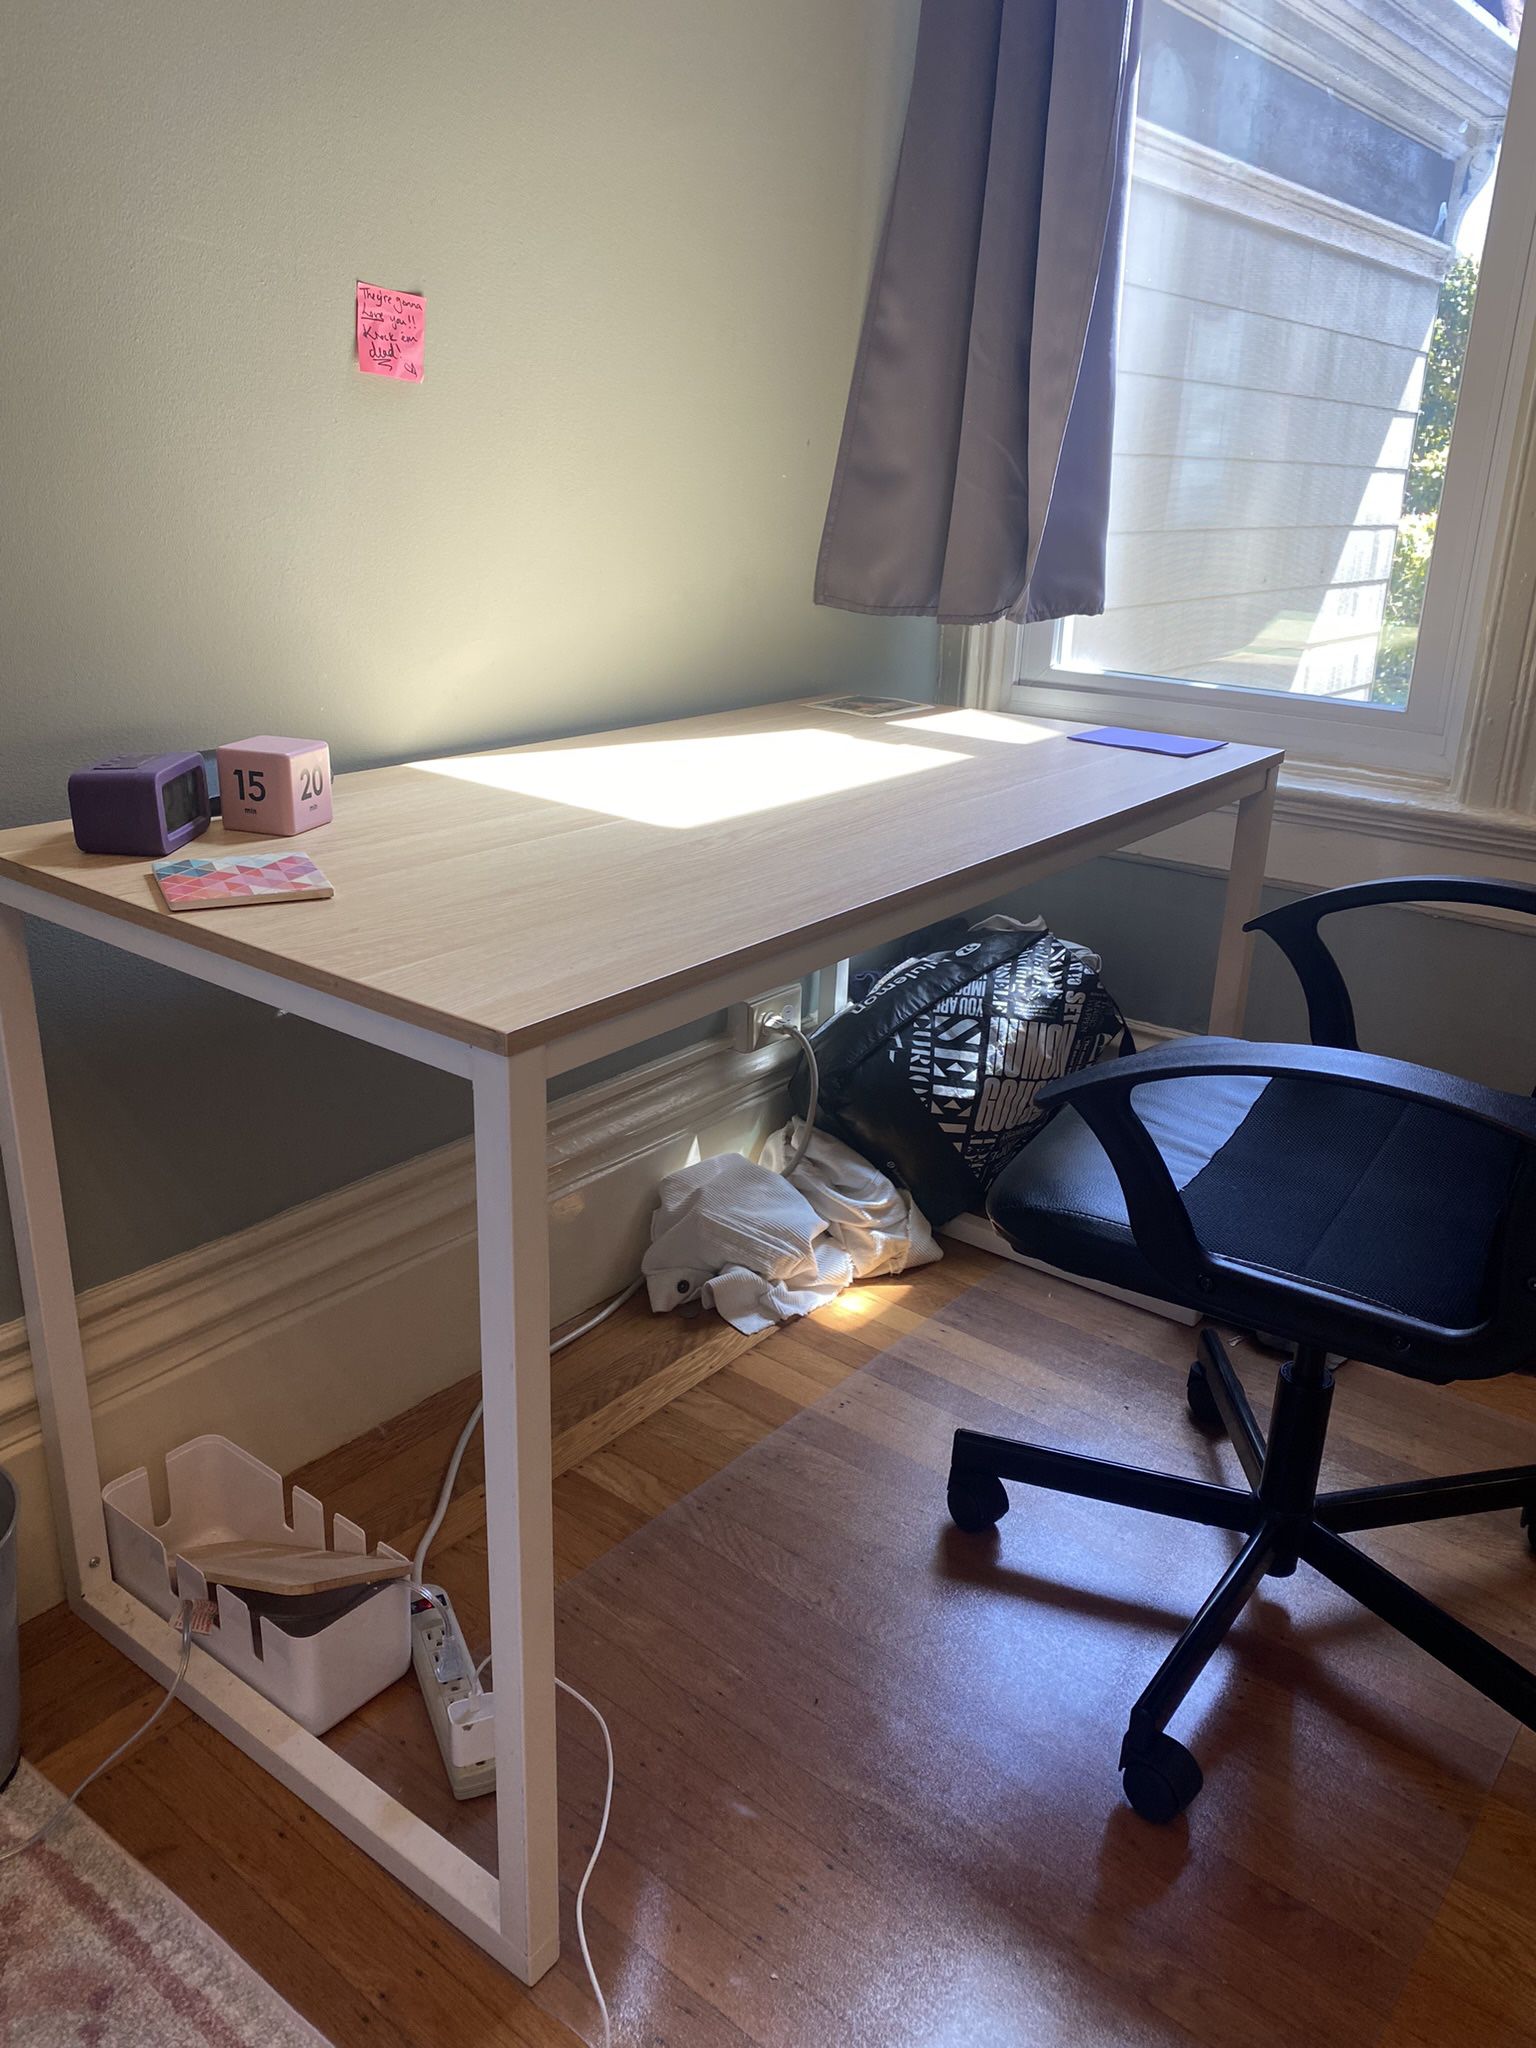 Wayfair Desk And Chair - MUST GO BY 4/30